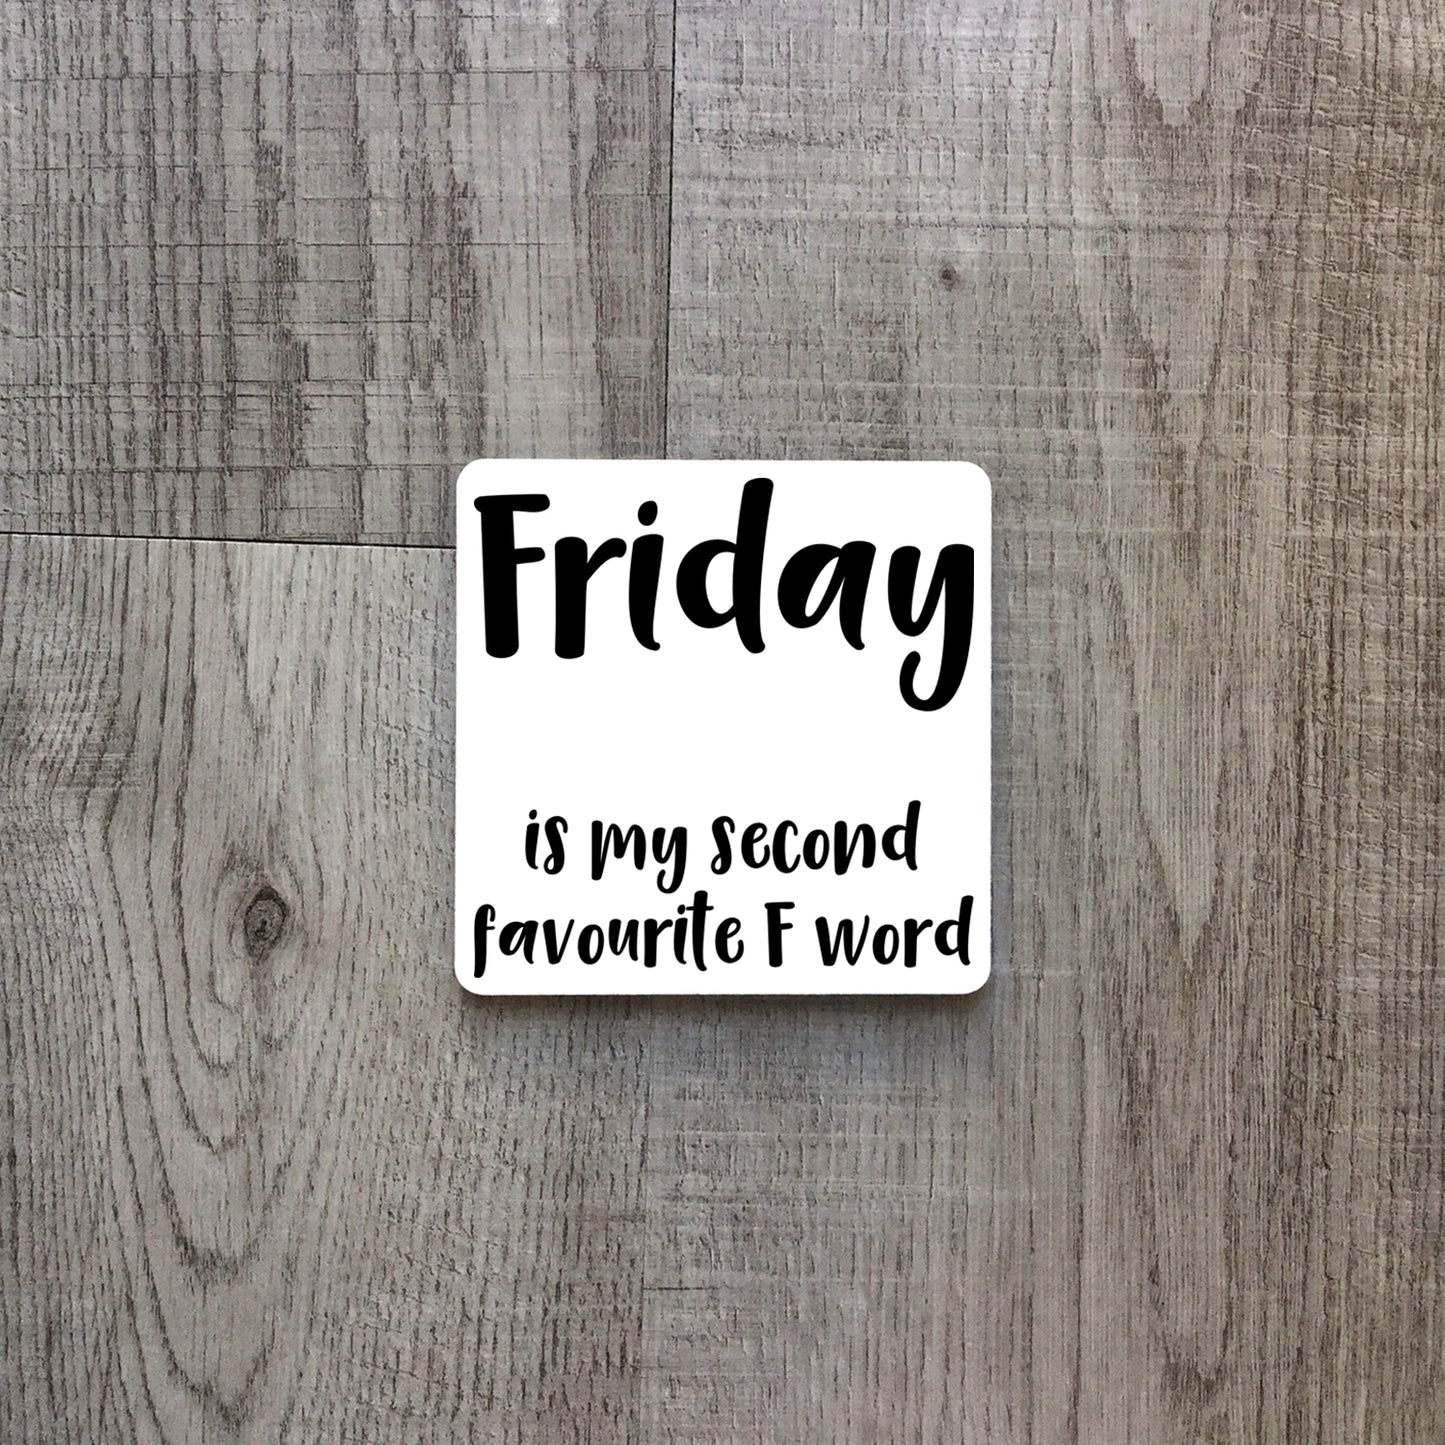 Friday is my second favourite F word | Ceramic mug - Adnil Creations